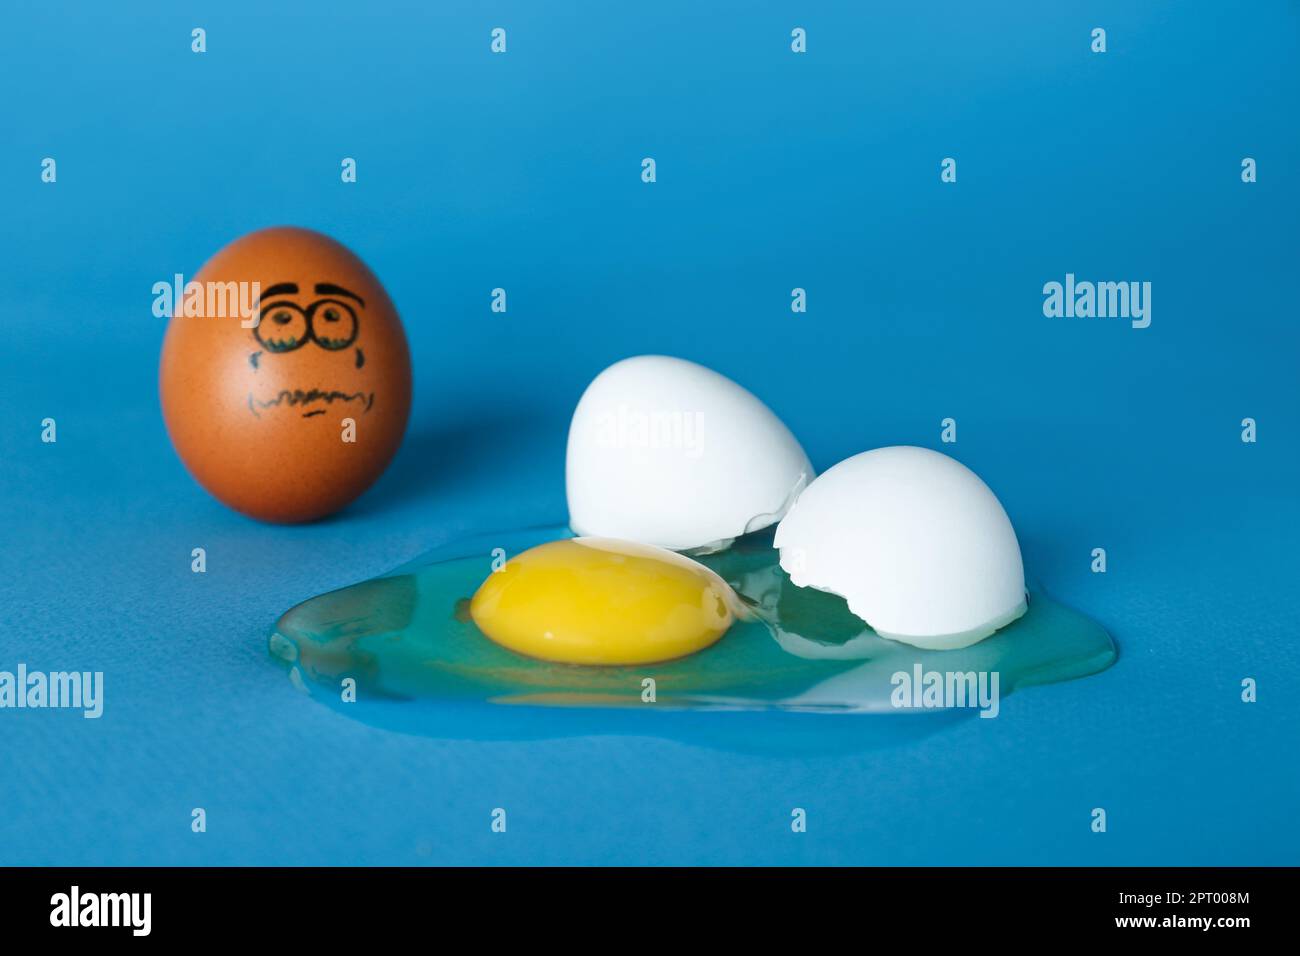 Whole egg with sad face and broken one on blue background Stock Photo